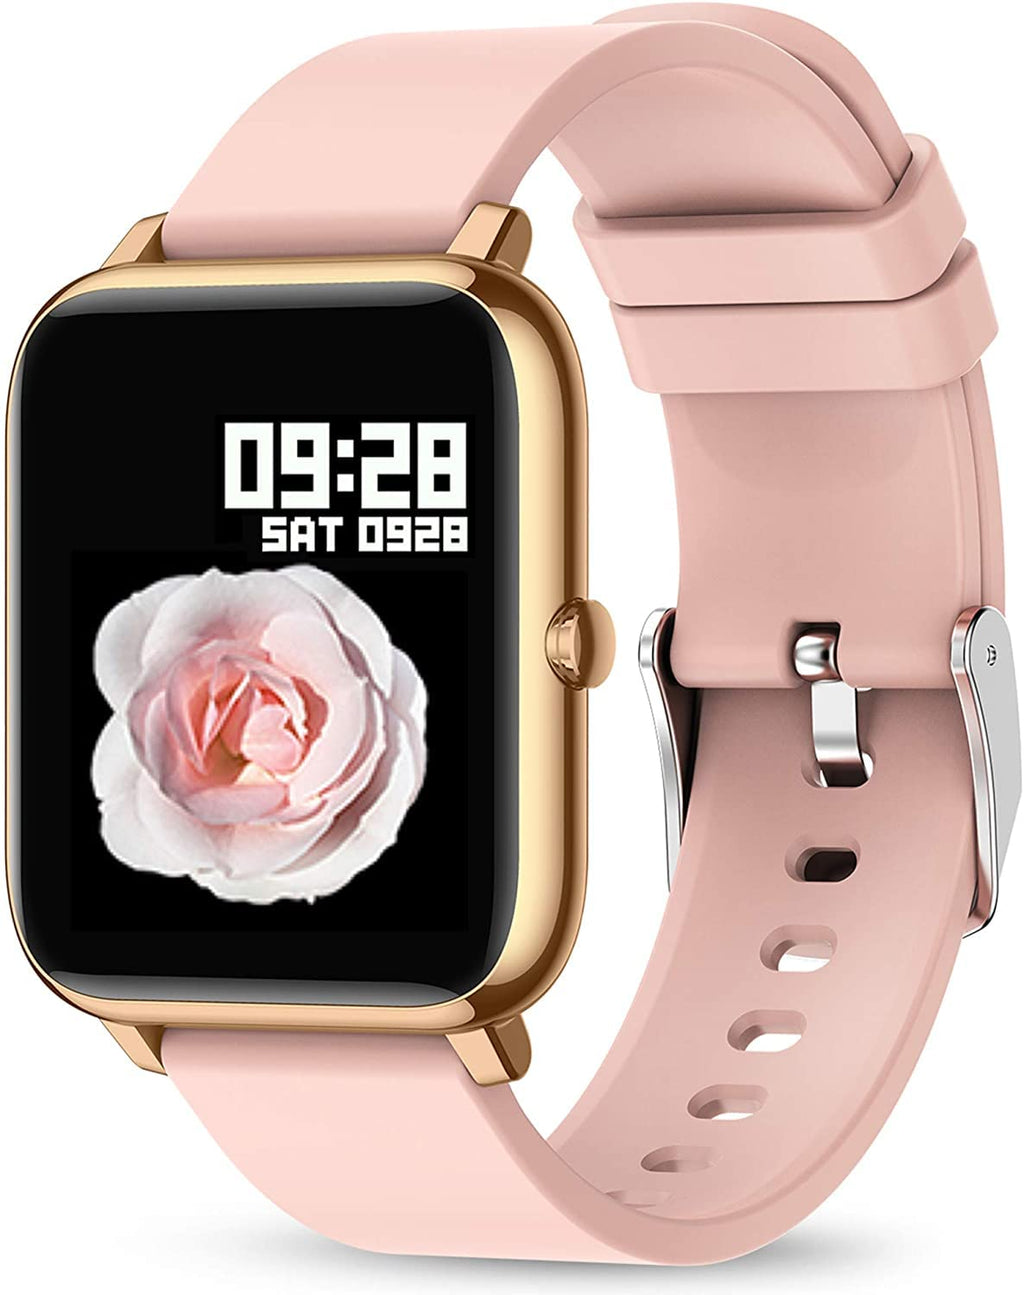  [AUSTRALIA] - Smart Watch, KALINCO Fitness Tracker with Heart Rate Monitor, Blood Pressure, Blood Oxygen Tracking, 1.4 Inch Touch Screen Smartwatch Fitness Watch for Women Men Compatible with Android iPhone iOS Gold Pink